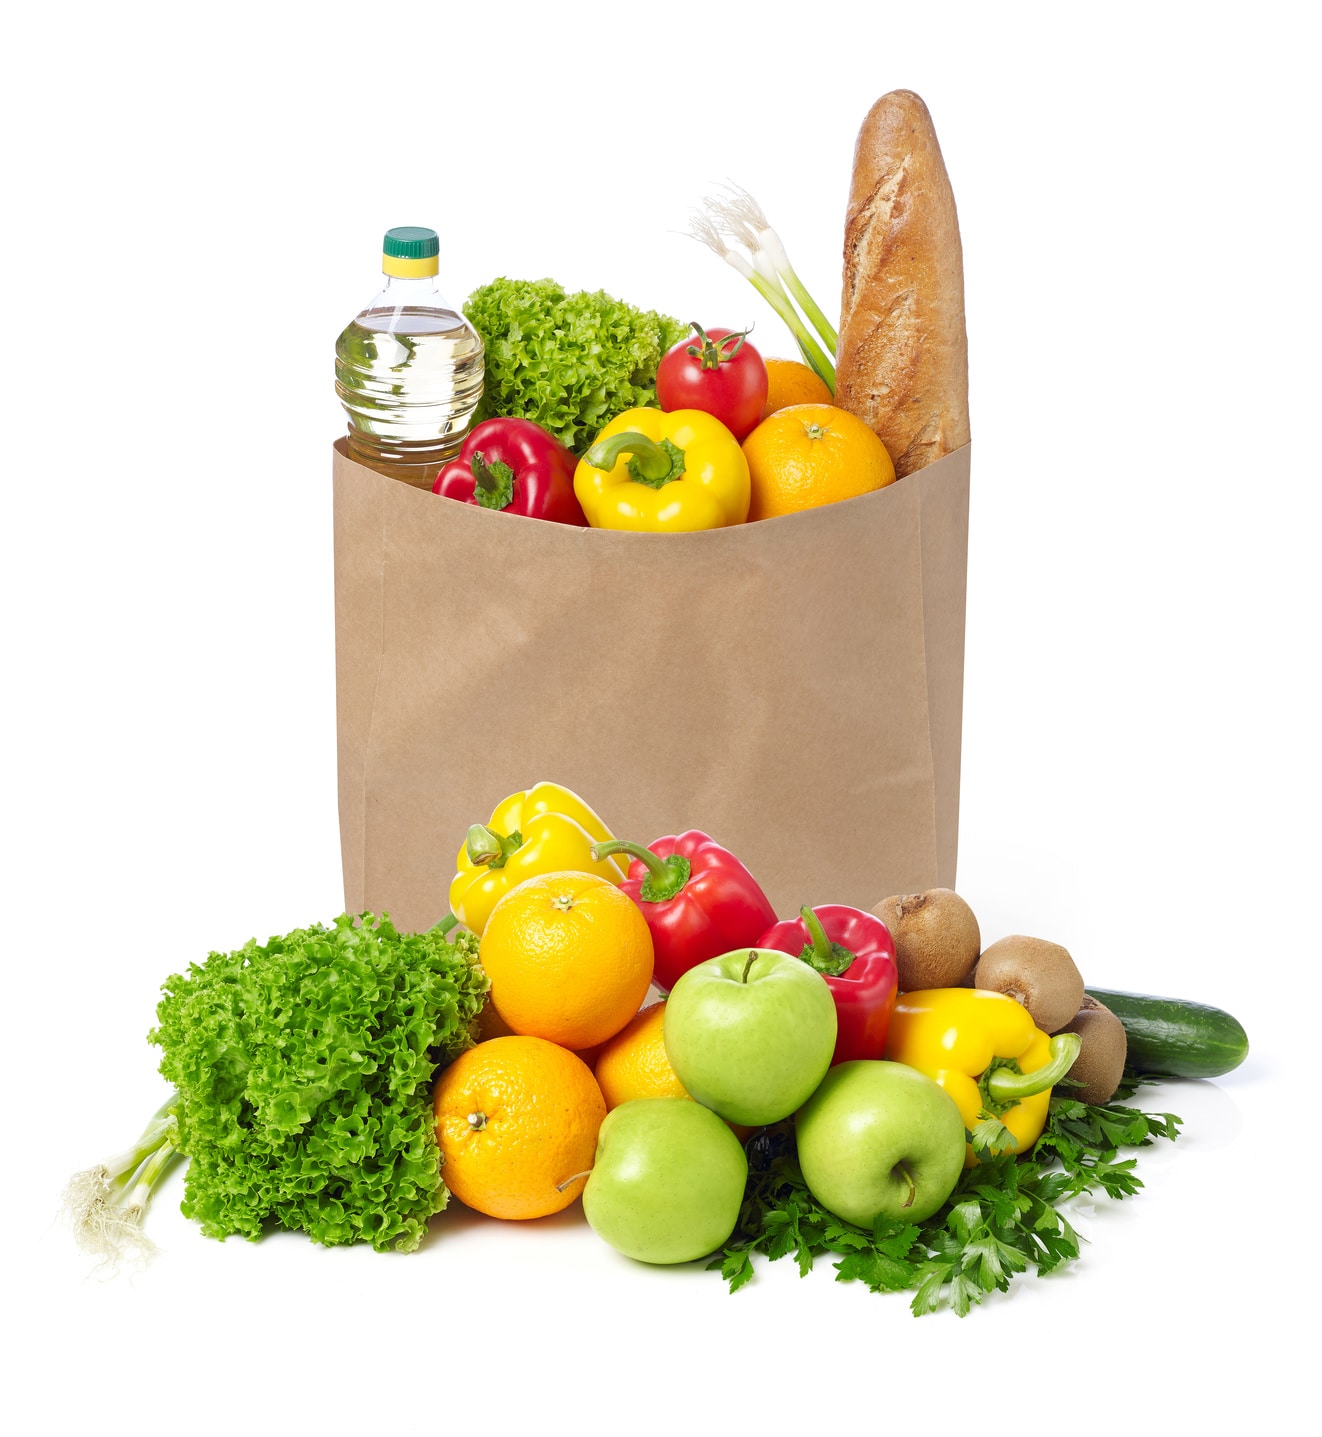 Tips for Storing your Groceries